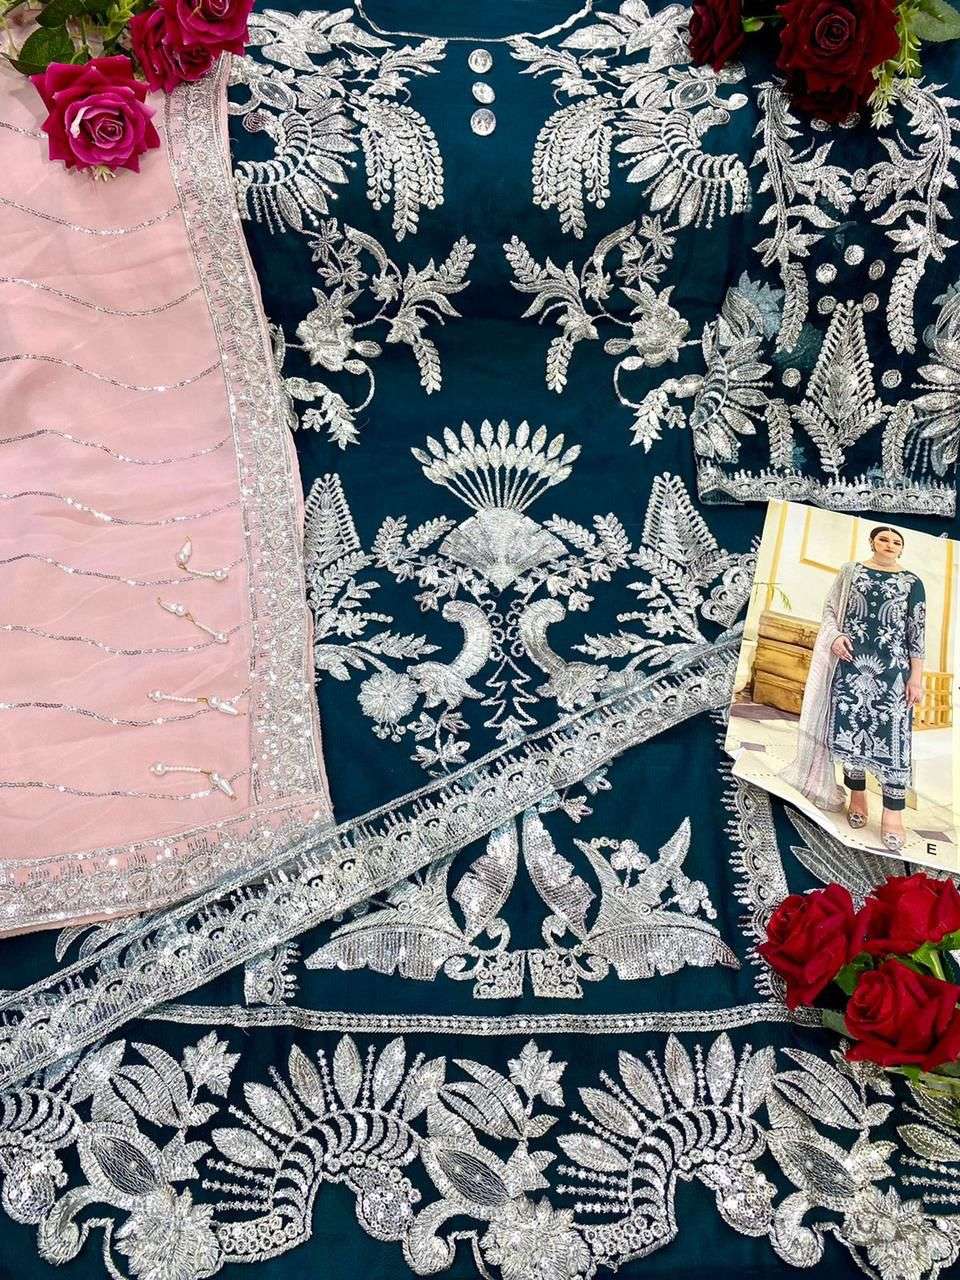 RAMSHA 14 COLOURS BY ARMANI 14-A TO 14-E SERIES PAKISTANI SUITS BEAUTIFUL FANCY COLORFUL STYLISH PARTY WEAR & OCCASIONAL WEAR BUTTERFLY NET WITH EMBROIDERY DRESSES AT WHOLESALE PRICE